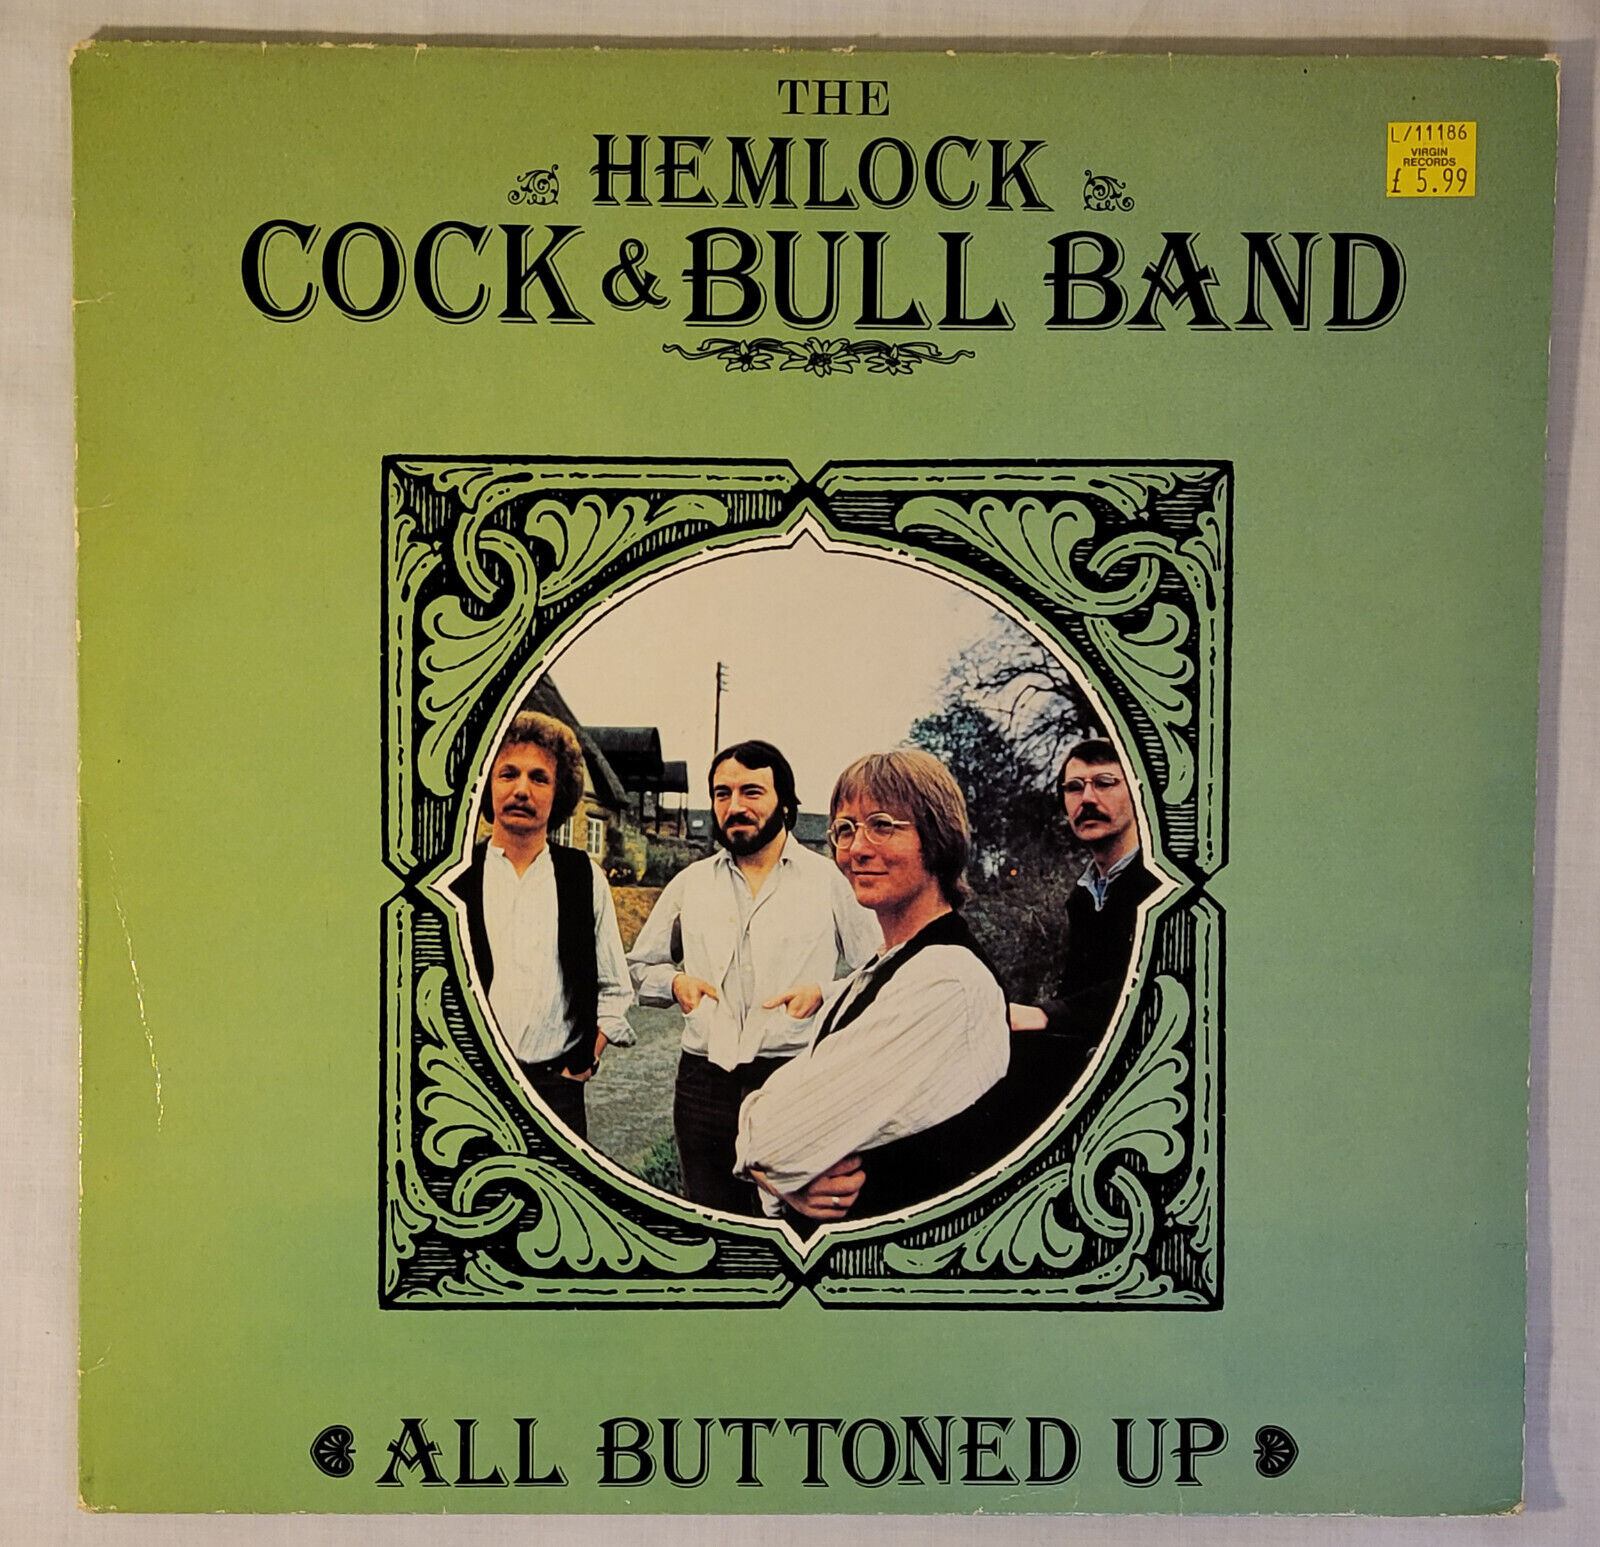 All Buttoned Up by the Hemlock Cock & Bull Band (LP, 1981) British folk